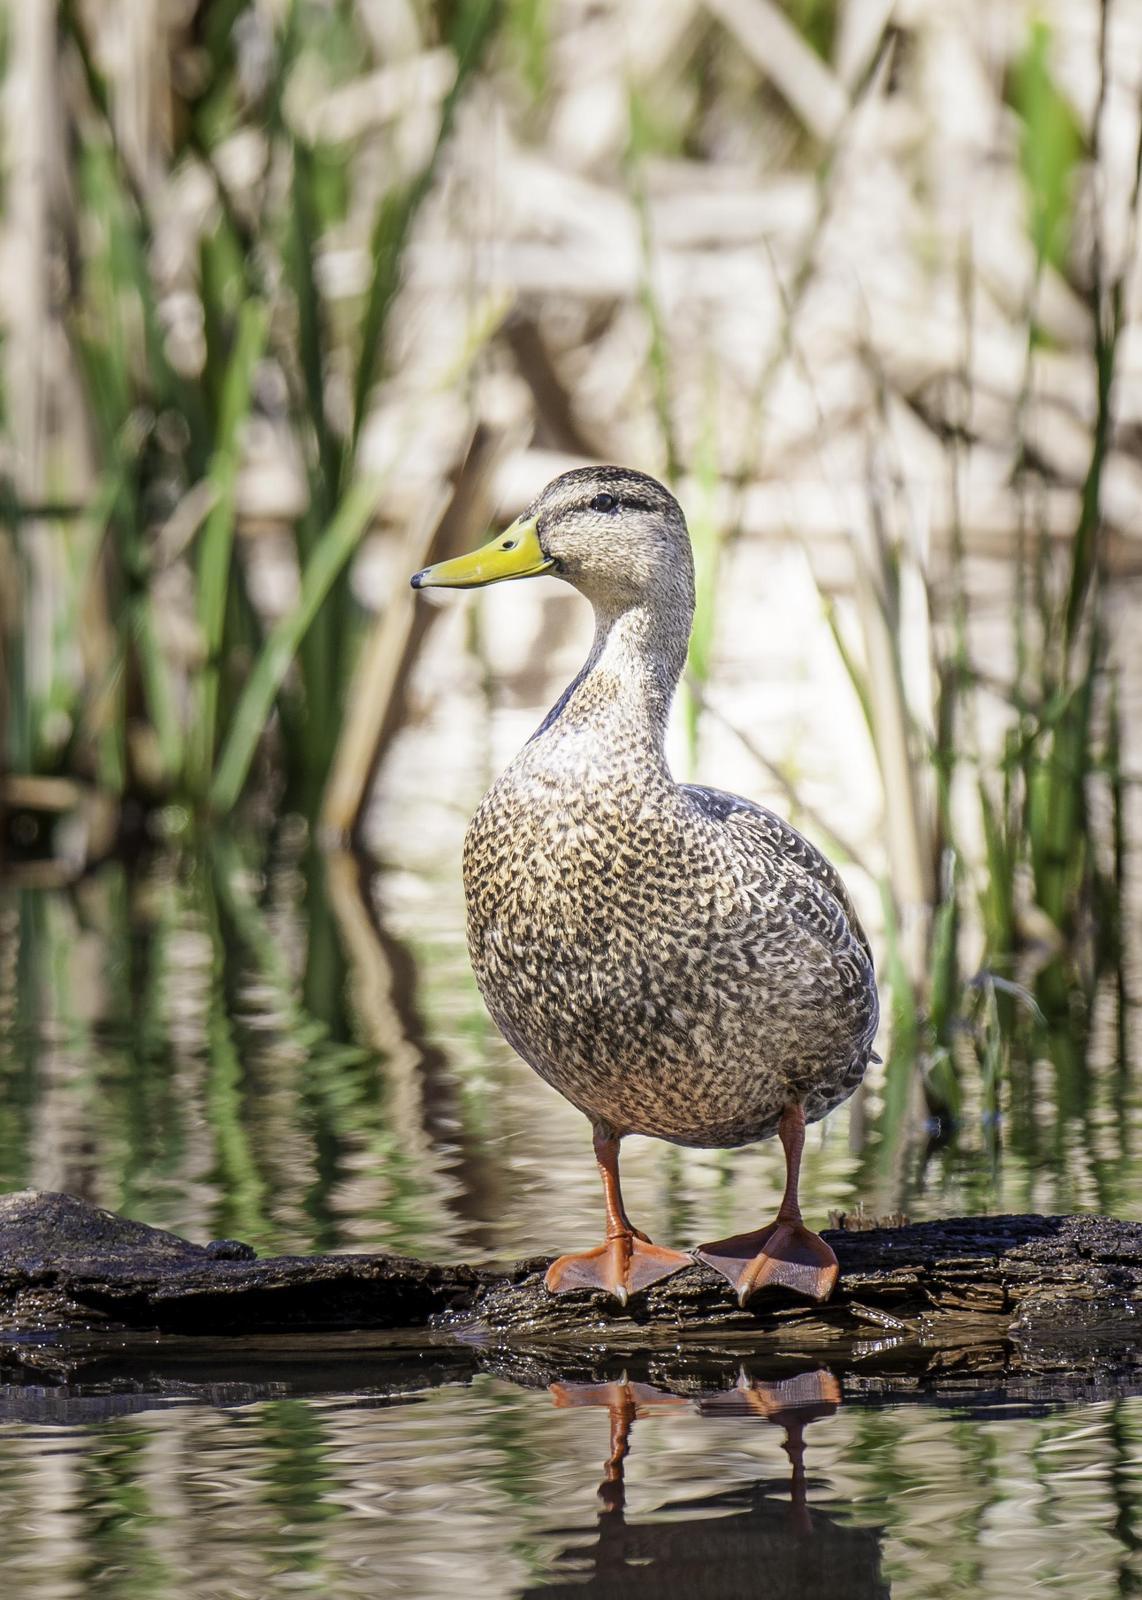 Mexican Duck Photo by Mason Rose